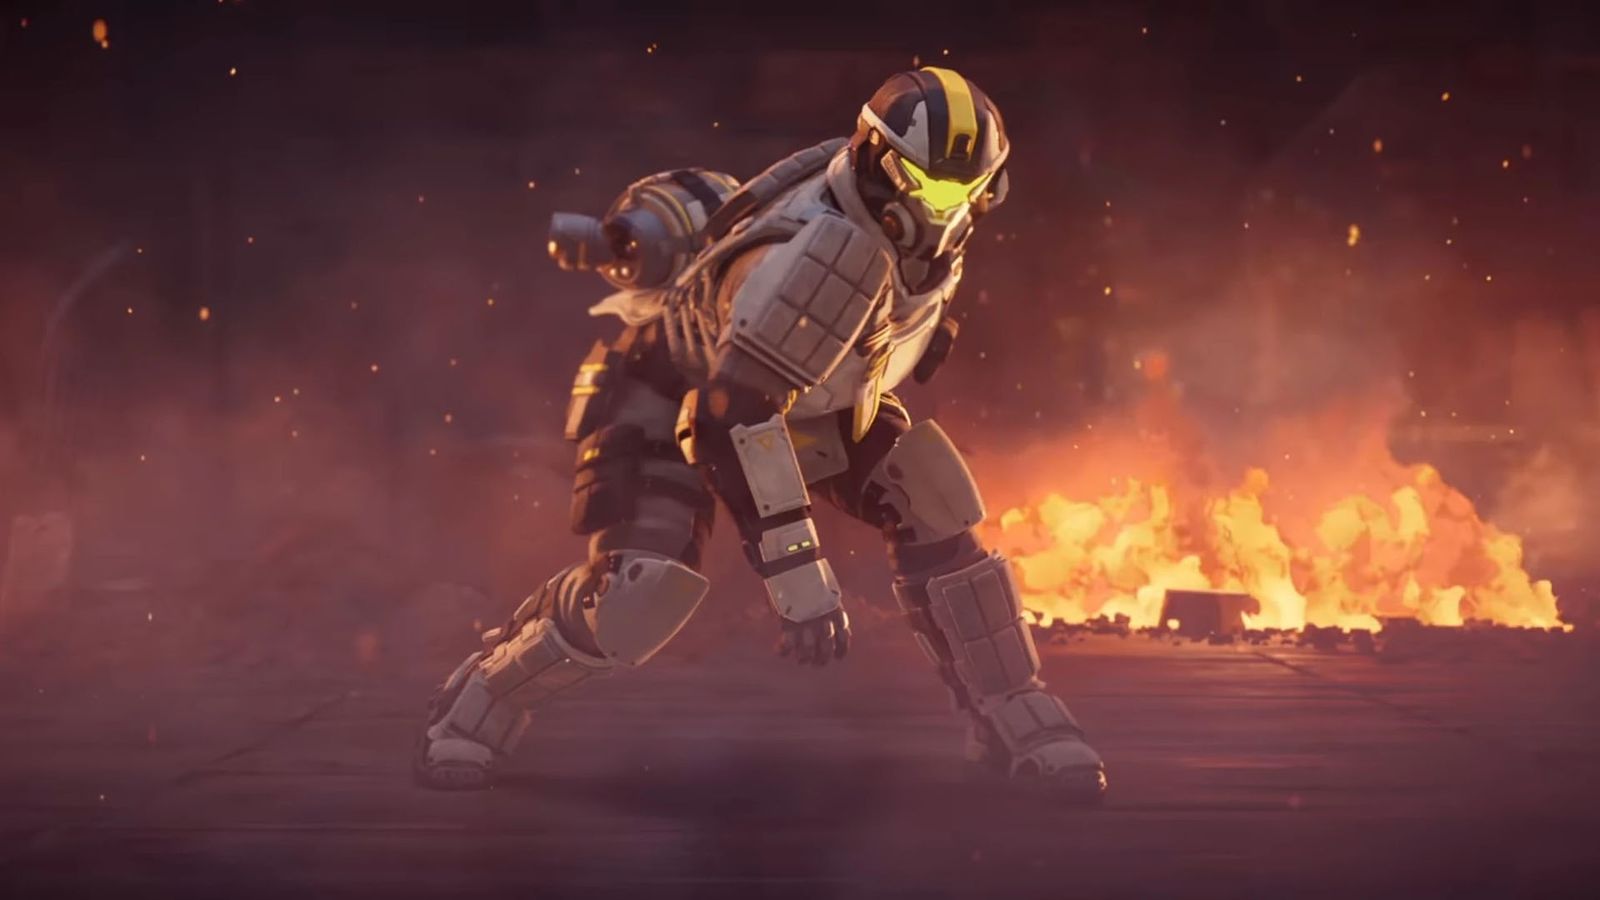 Screenshot of Apex Legends Scryer wearing body armour with flames in the background